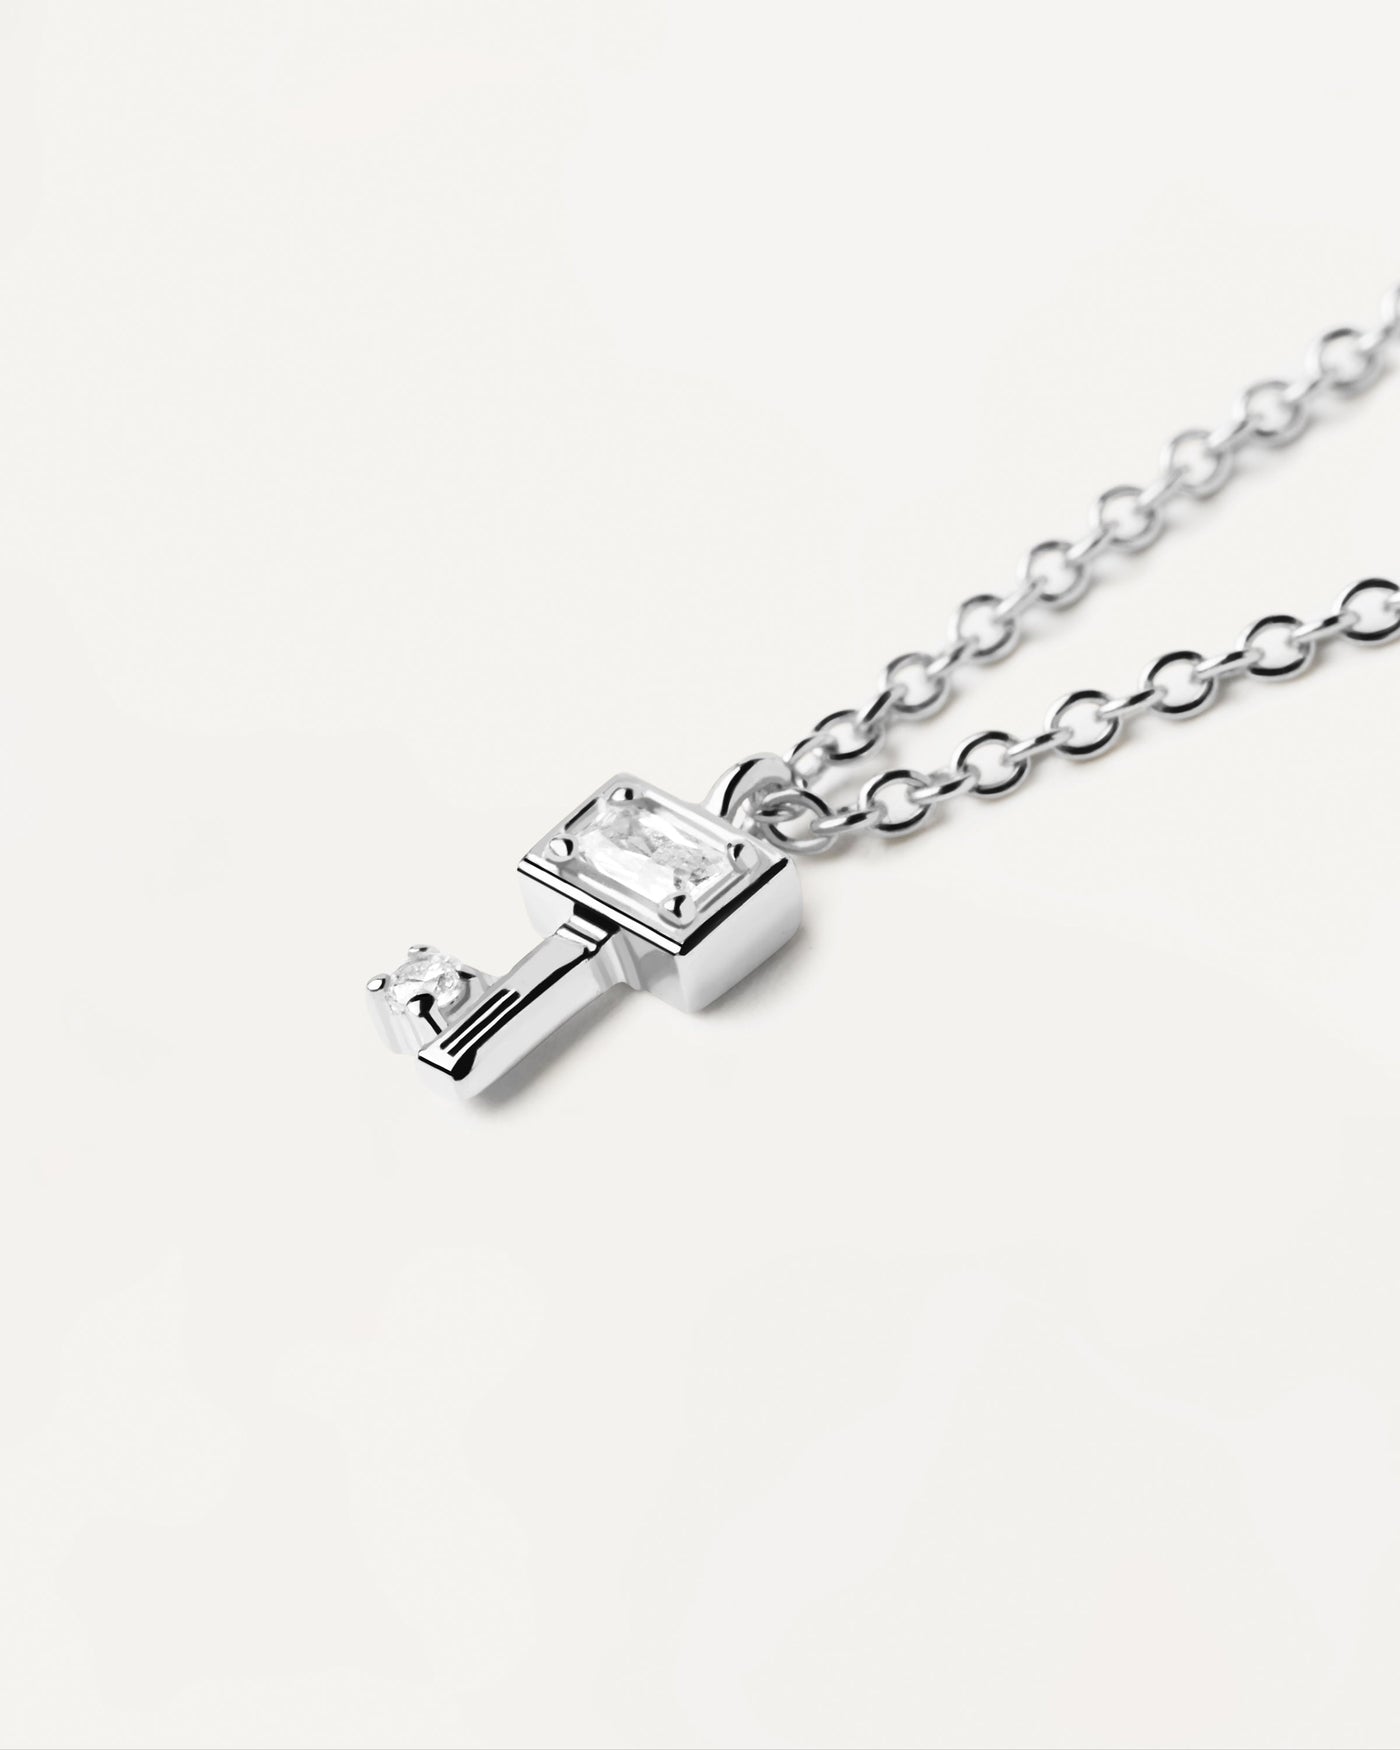 2023 Selection | Key Silver Necklace. Sterling silver necklace with key pendant and white zirconia. Get the latest arrival from PDPAOLA. Place your order safely and get this Best Seller. Free Shipping.